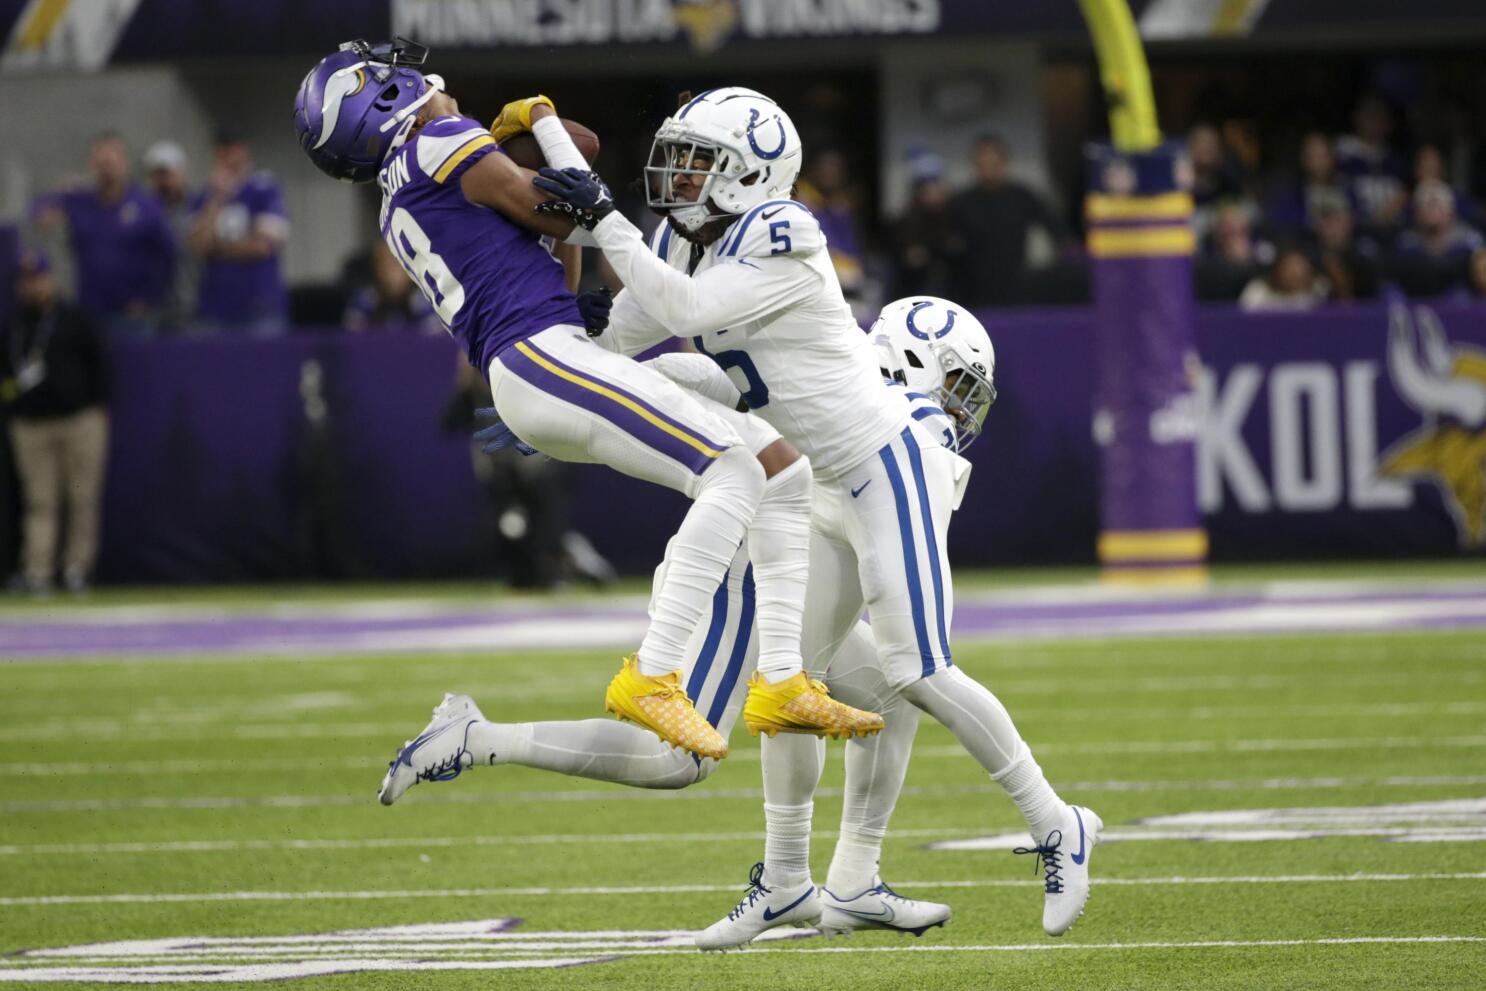 The Vikings have been historically good in close games – Twin Cities